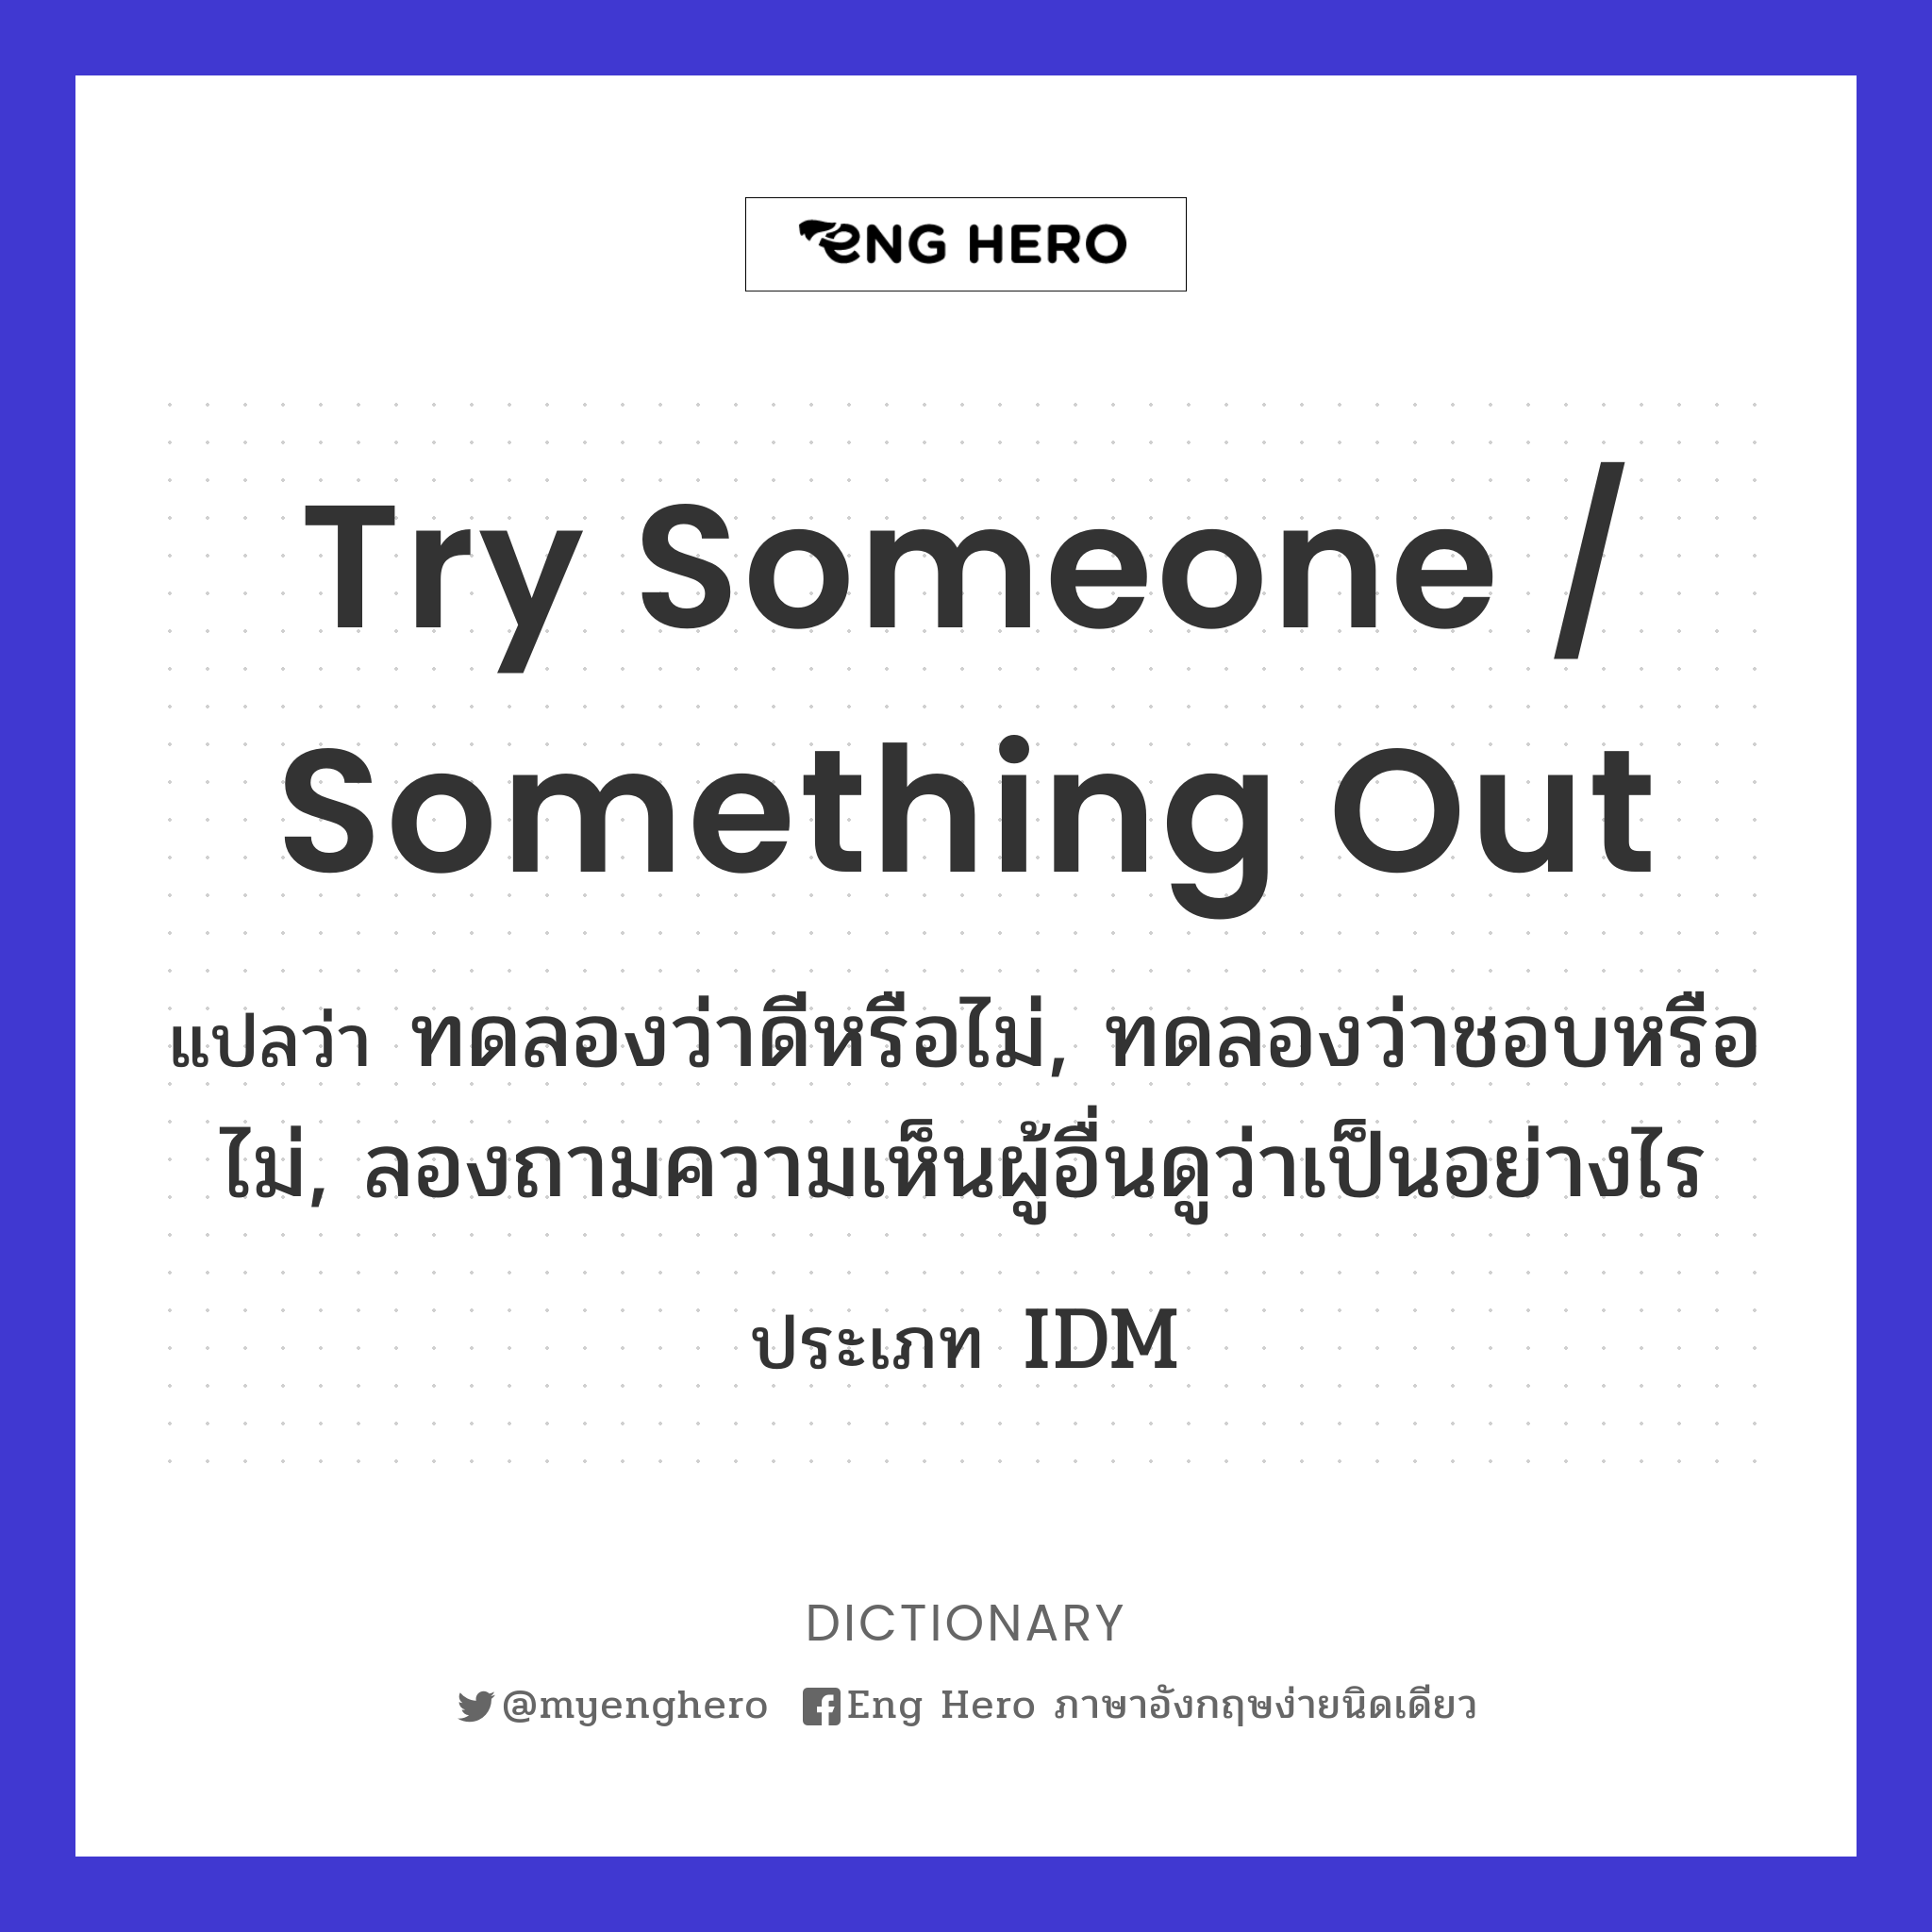 try someone / something out